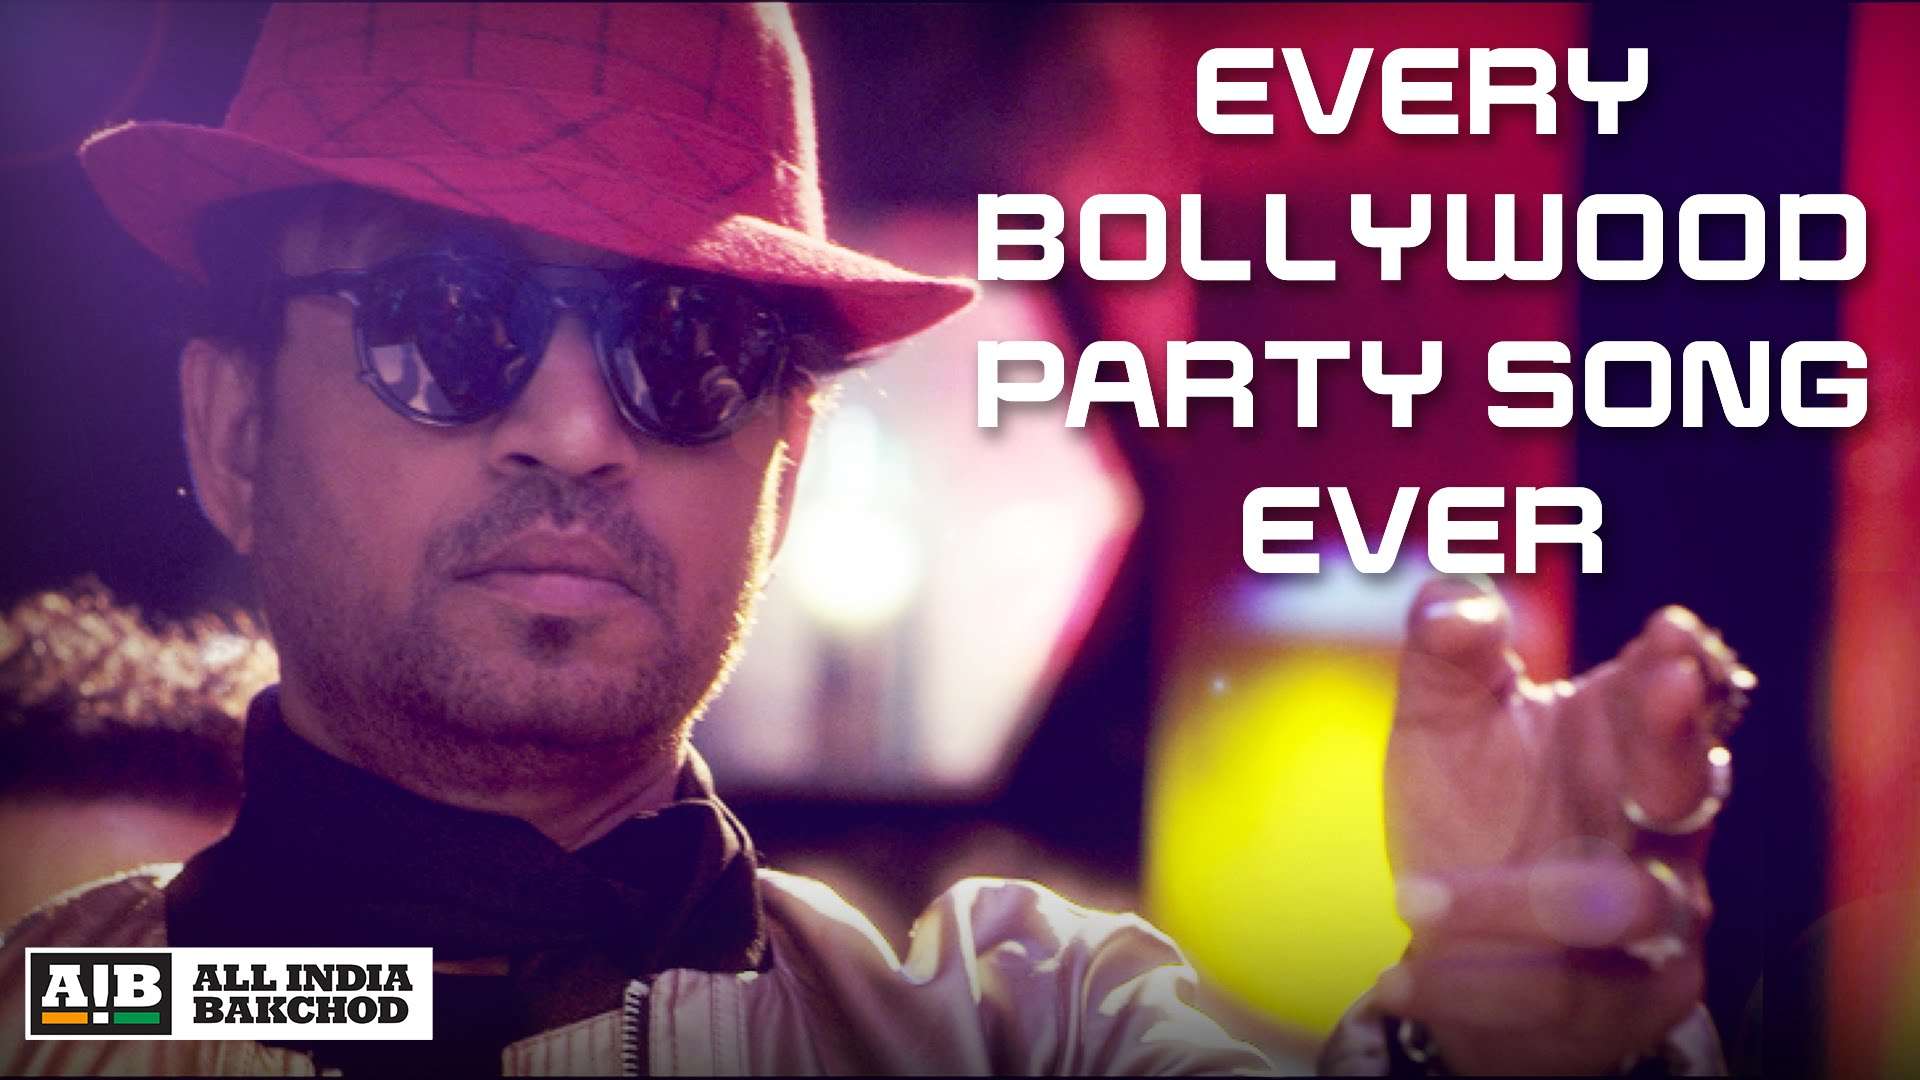 Irrfan from The AIB Party Song